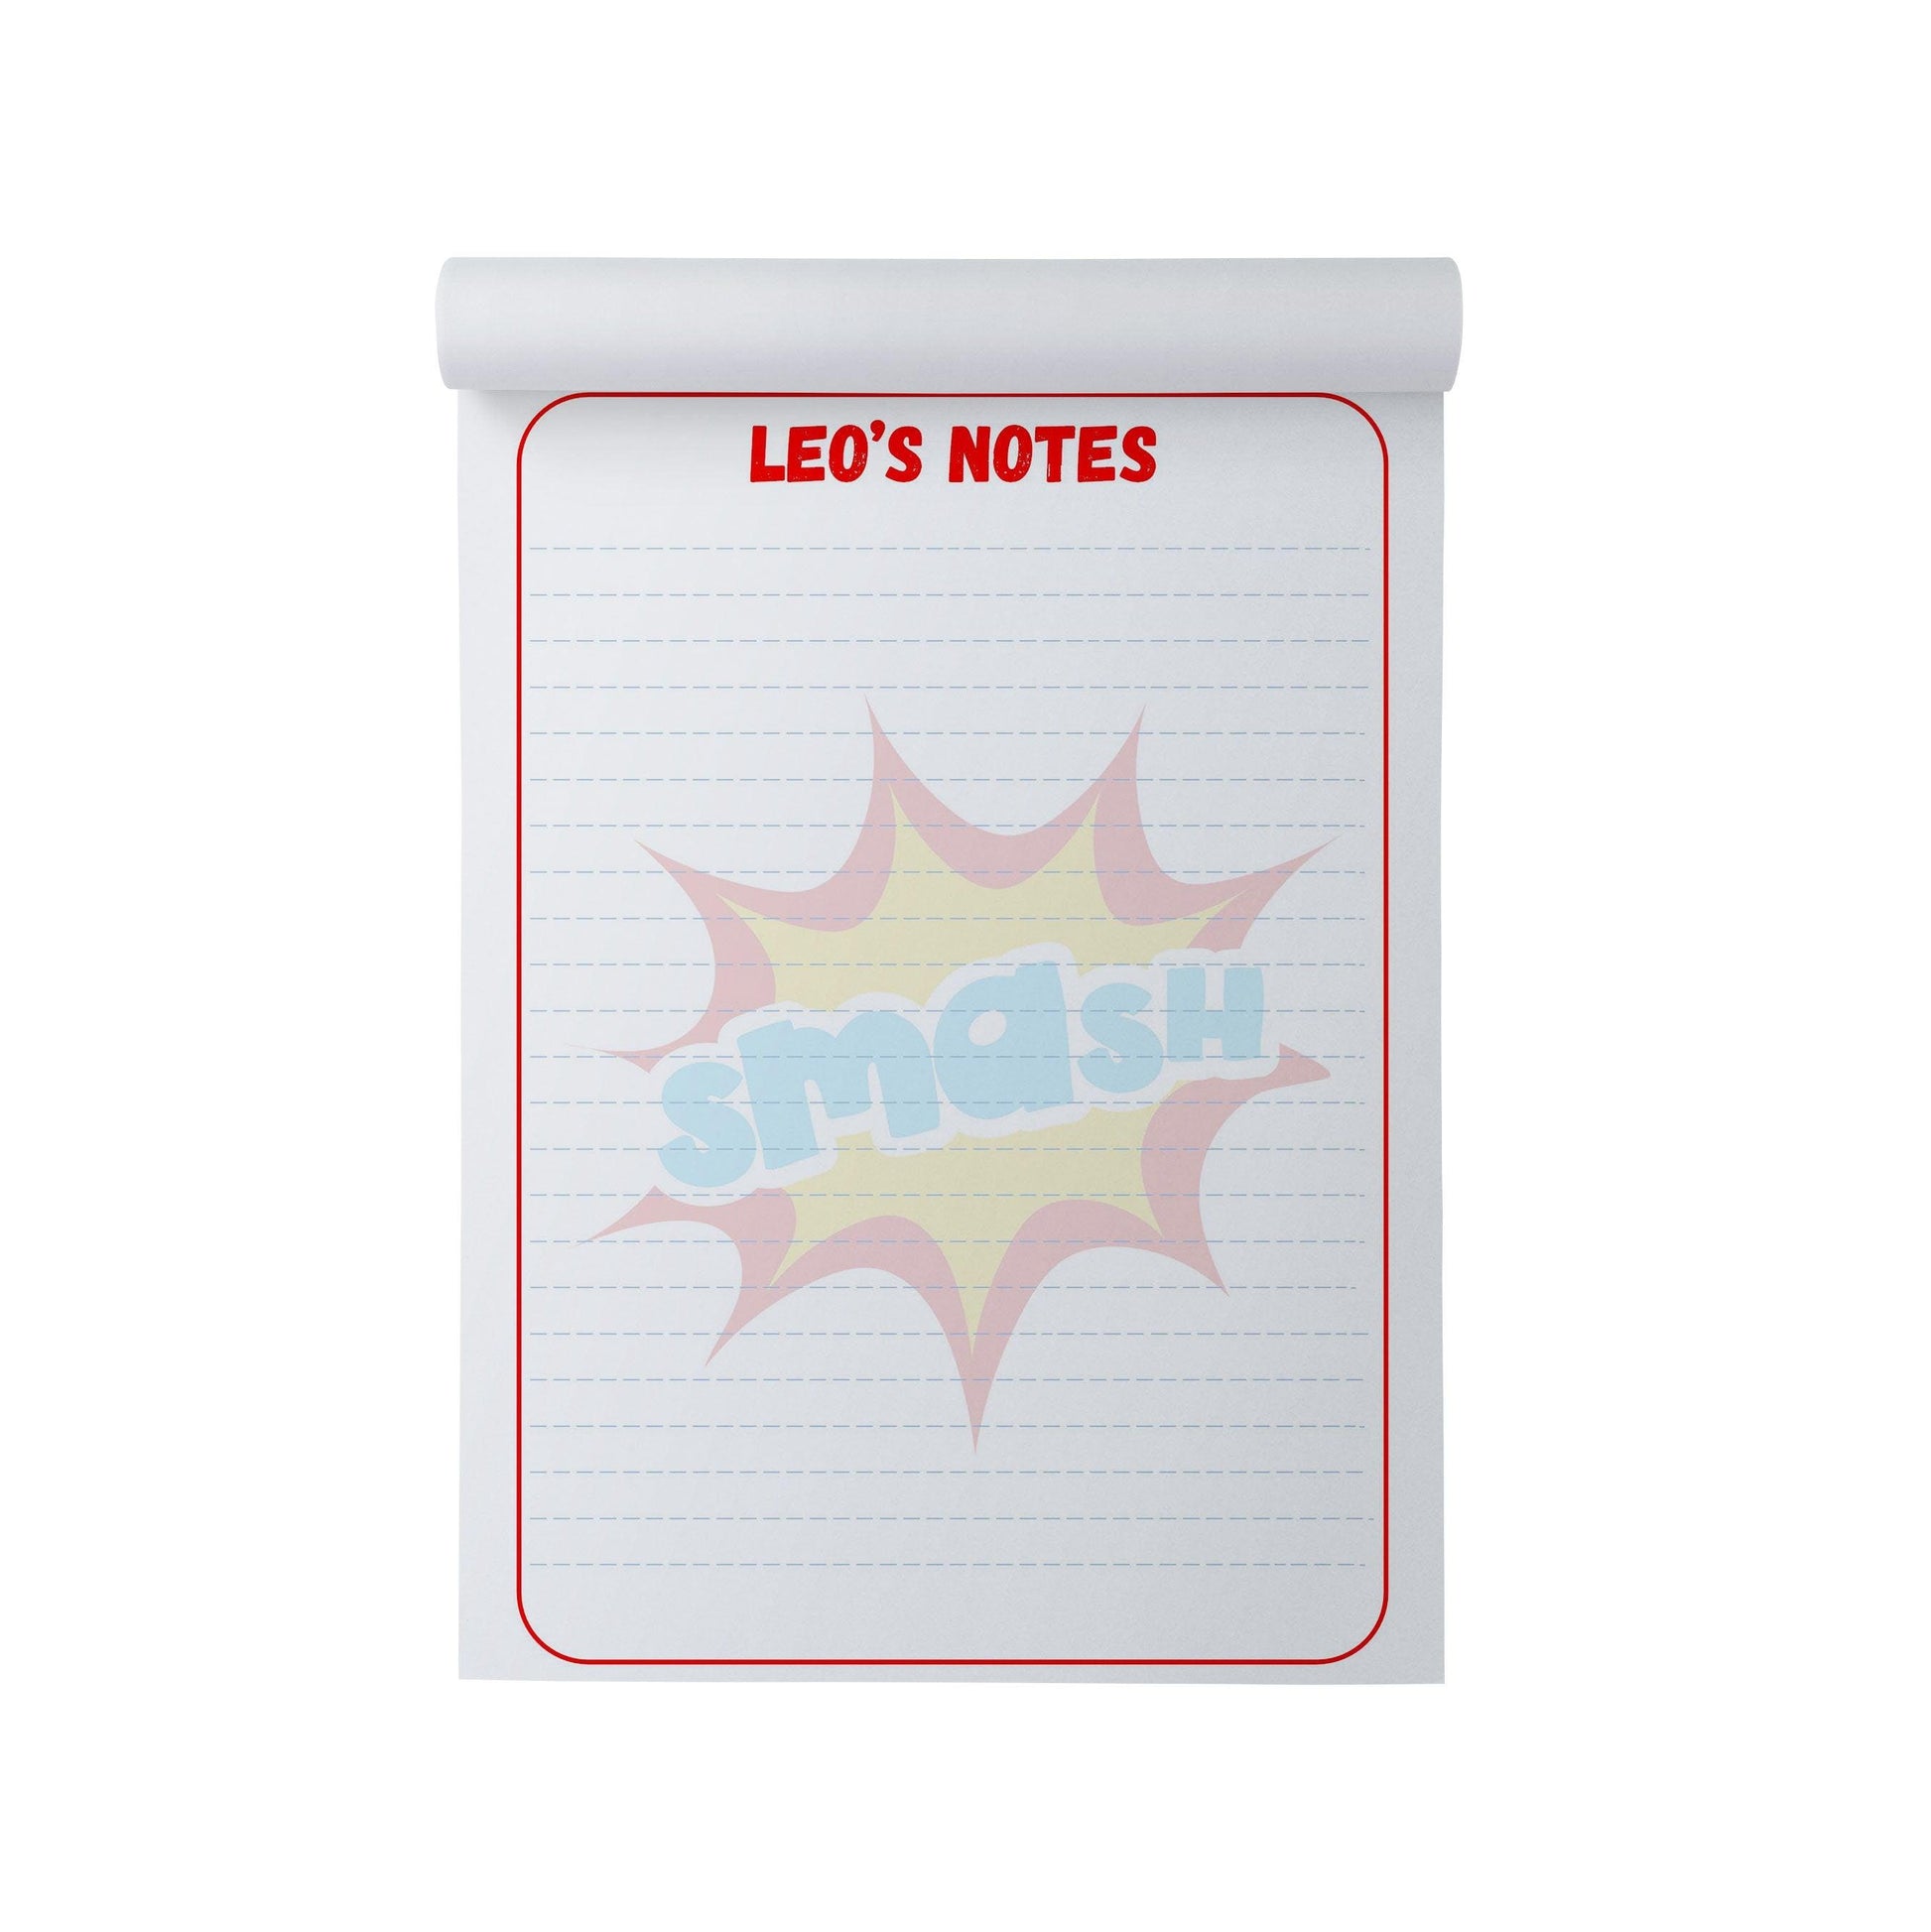  Superhero Personalised Note Pad, A5 With 50 Tear-off Sheets by PMPRINTED 